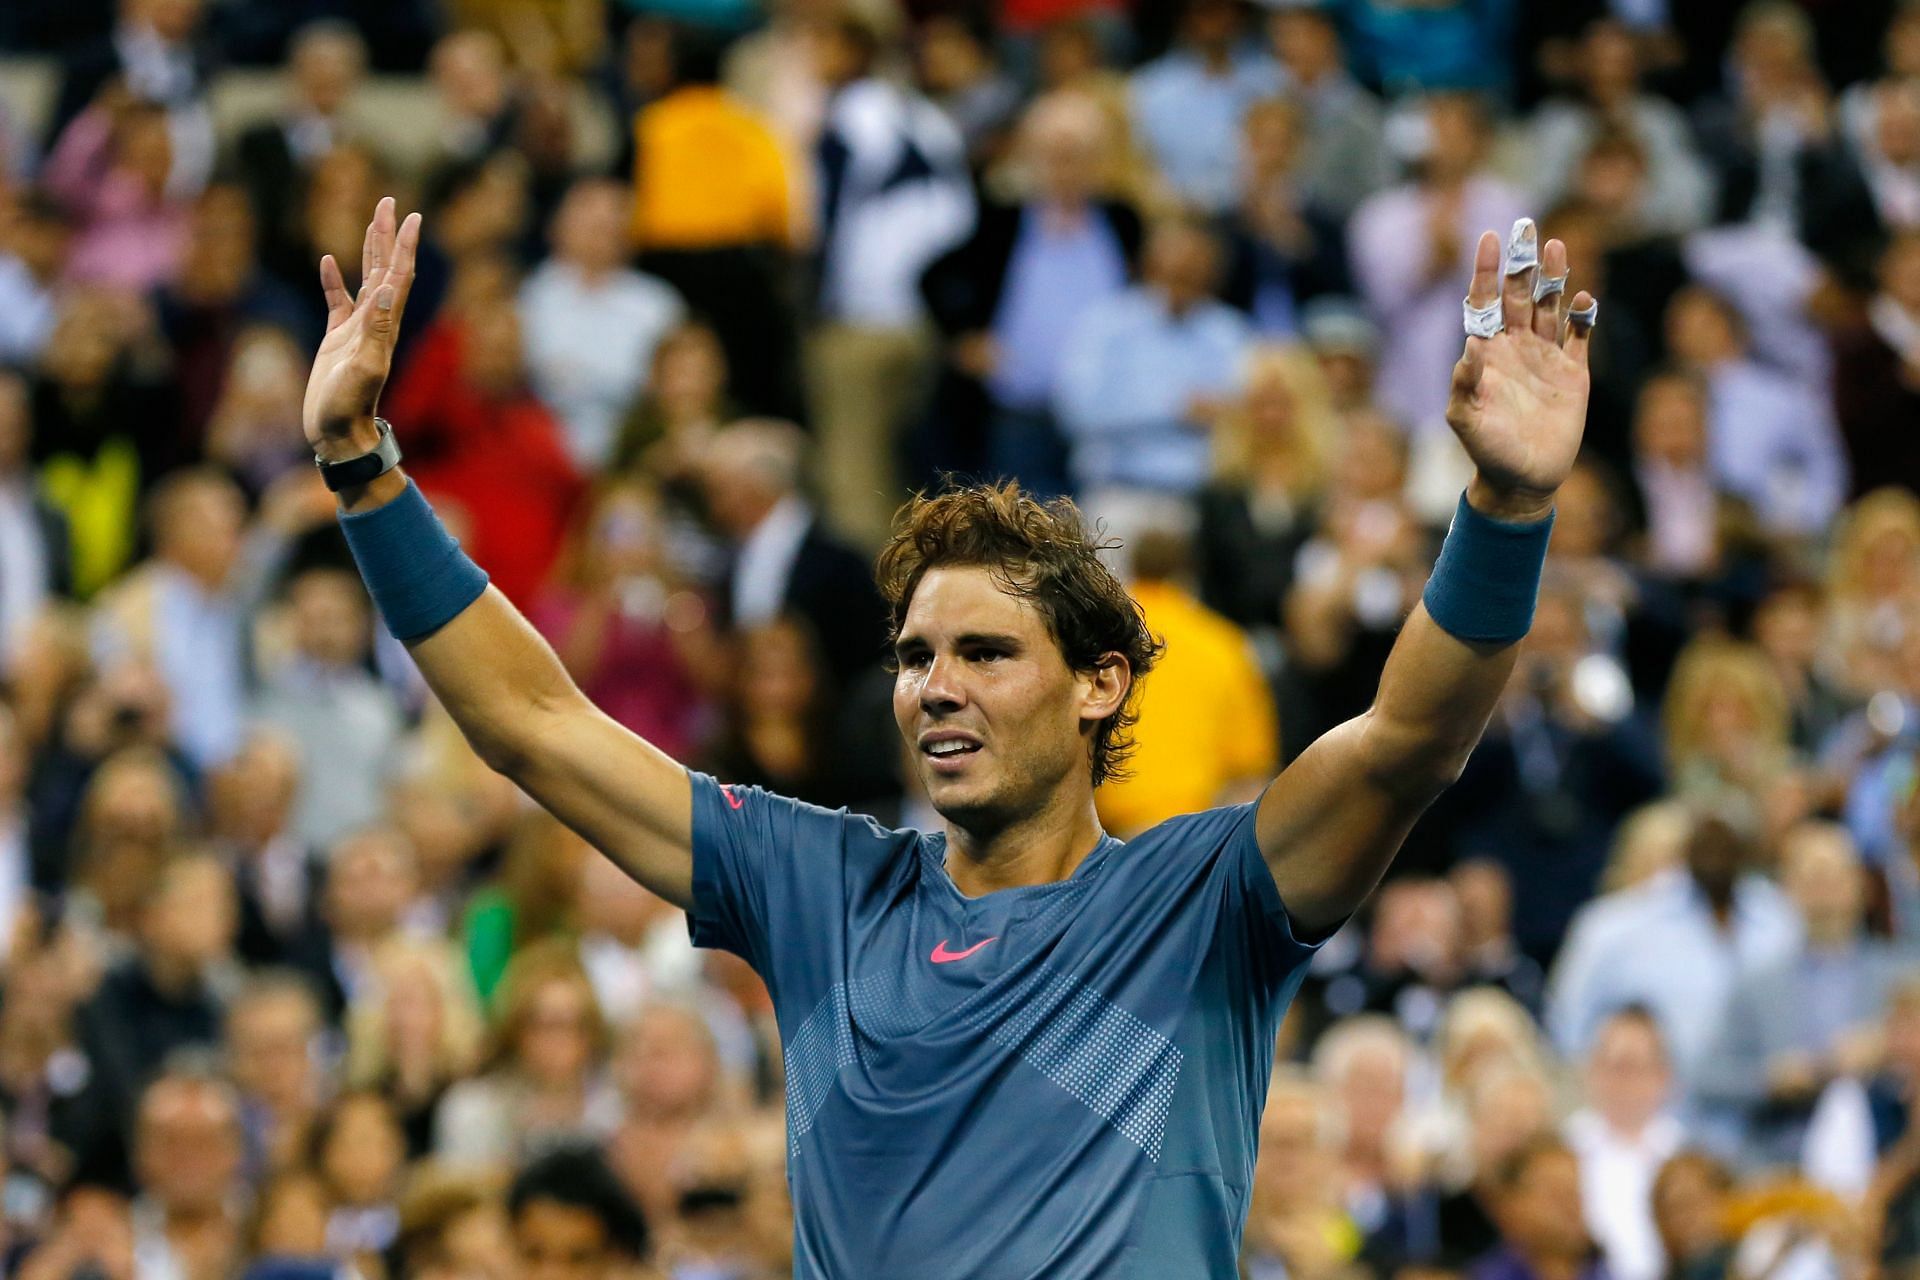 Rafael Nadal&#039;s best win streak on hardcourt came back in 2013 when he won 26 matches on the trot